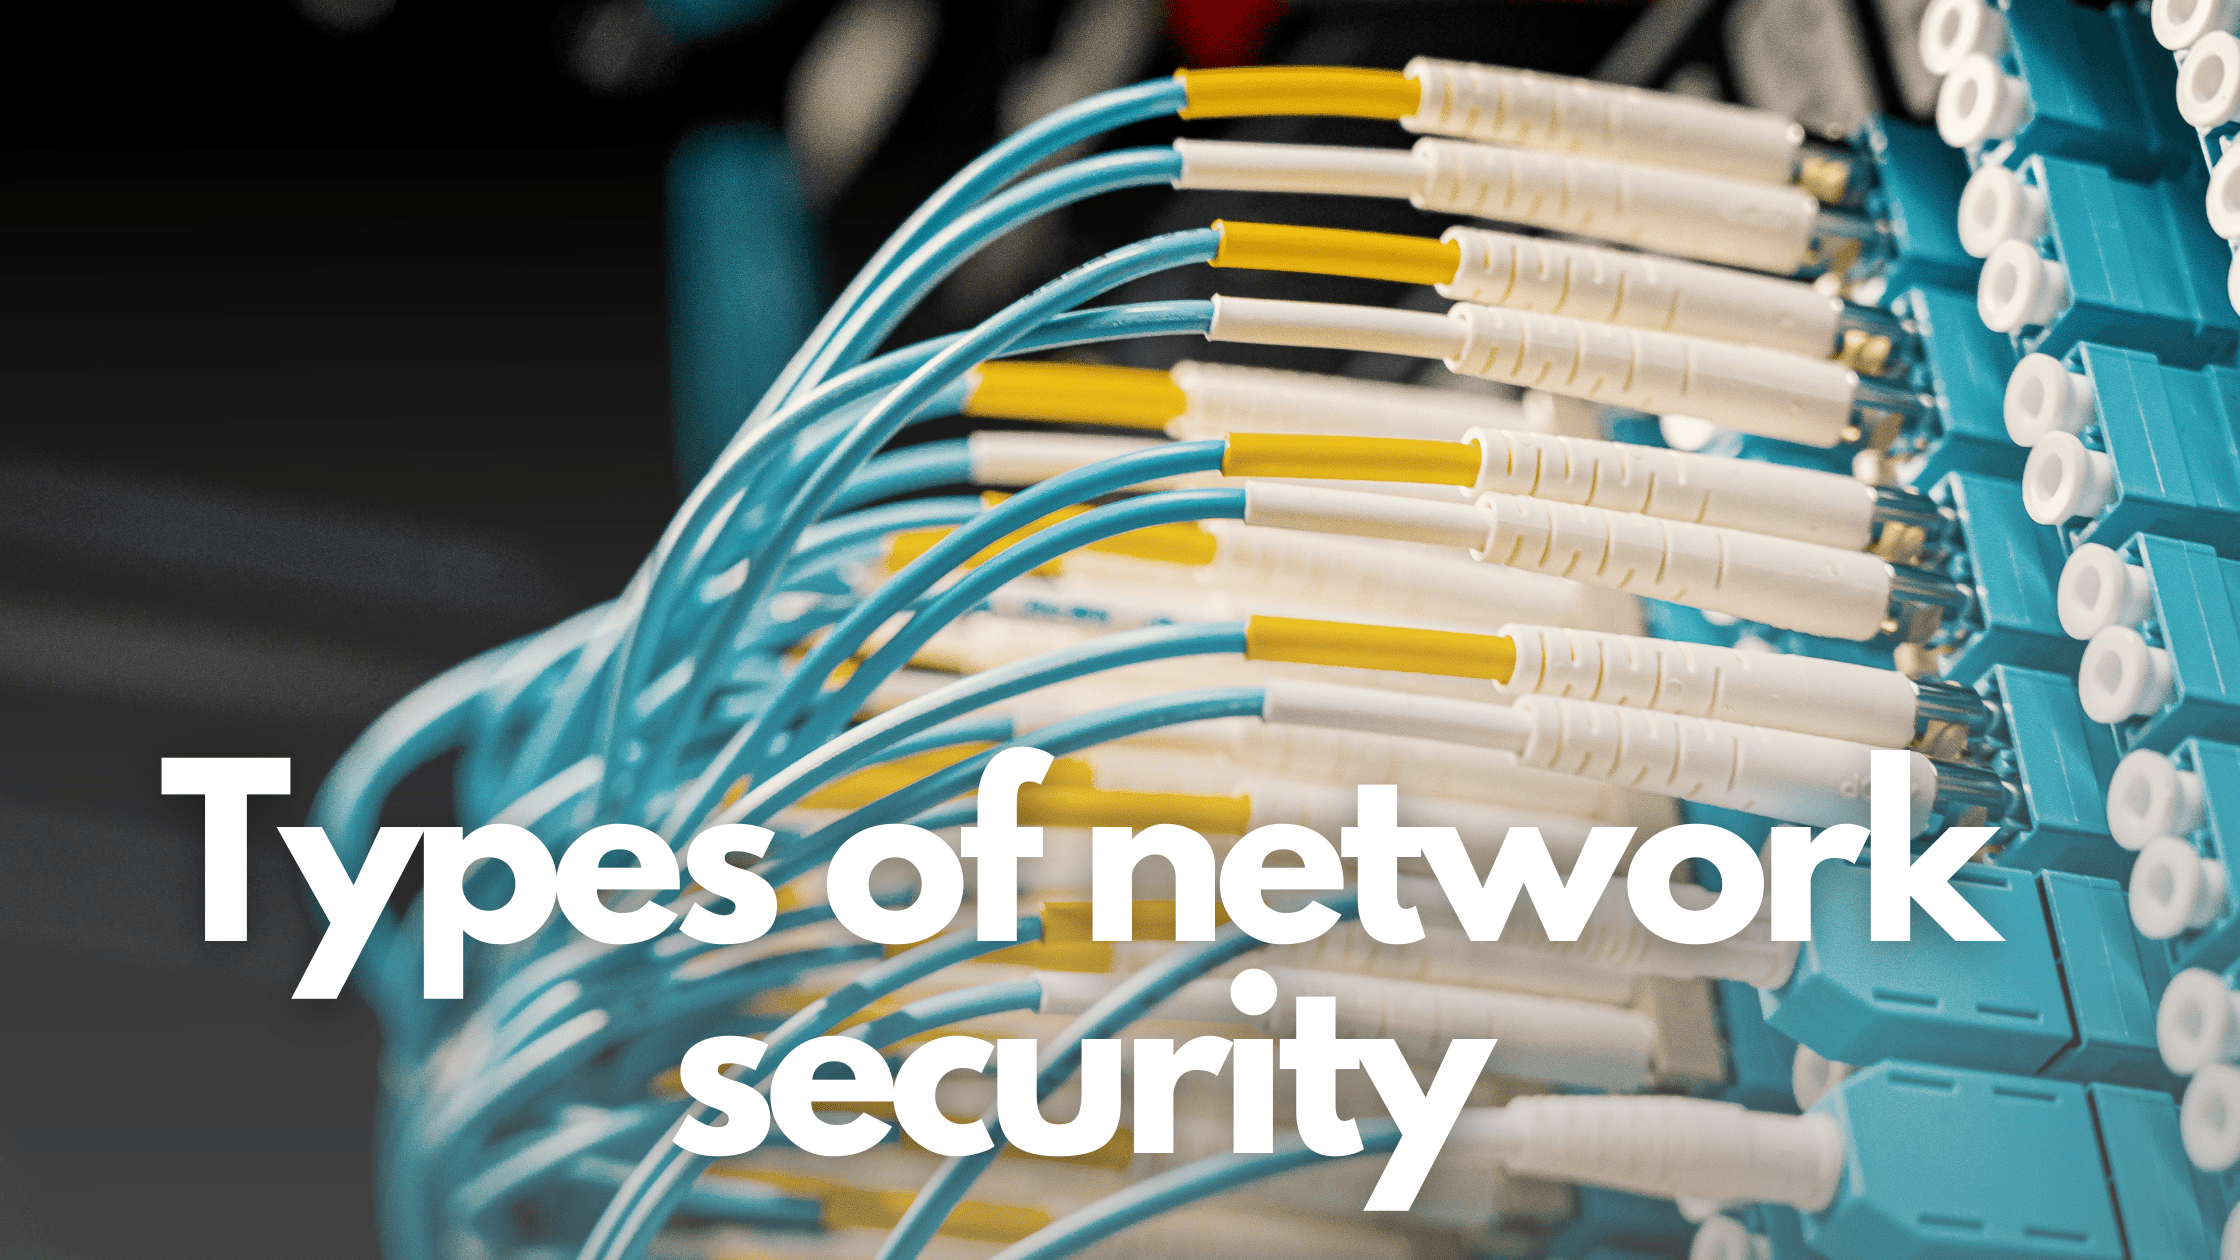 Network security and its types